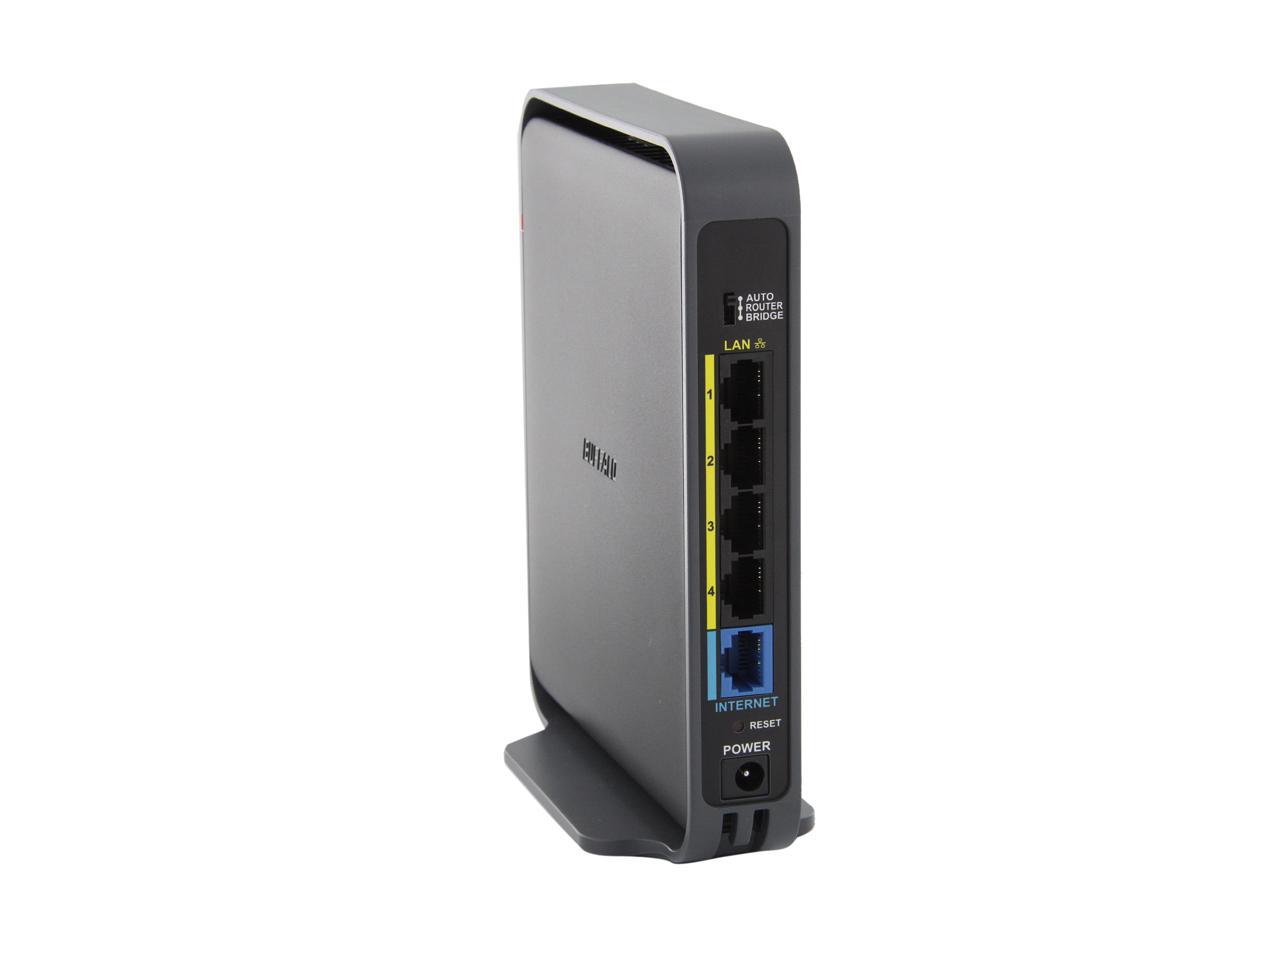 BUFFALO WHR-600D AirStation N600 Dual Wireless Router - Newegg.com